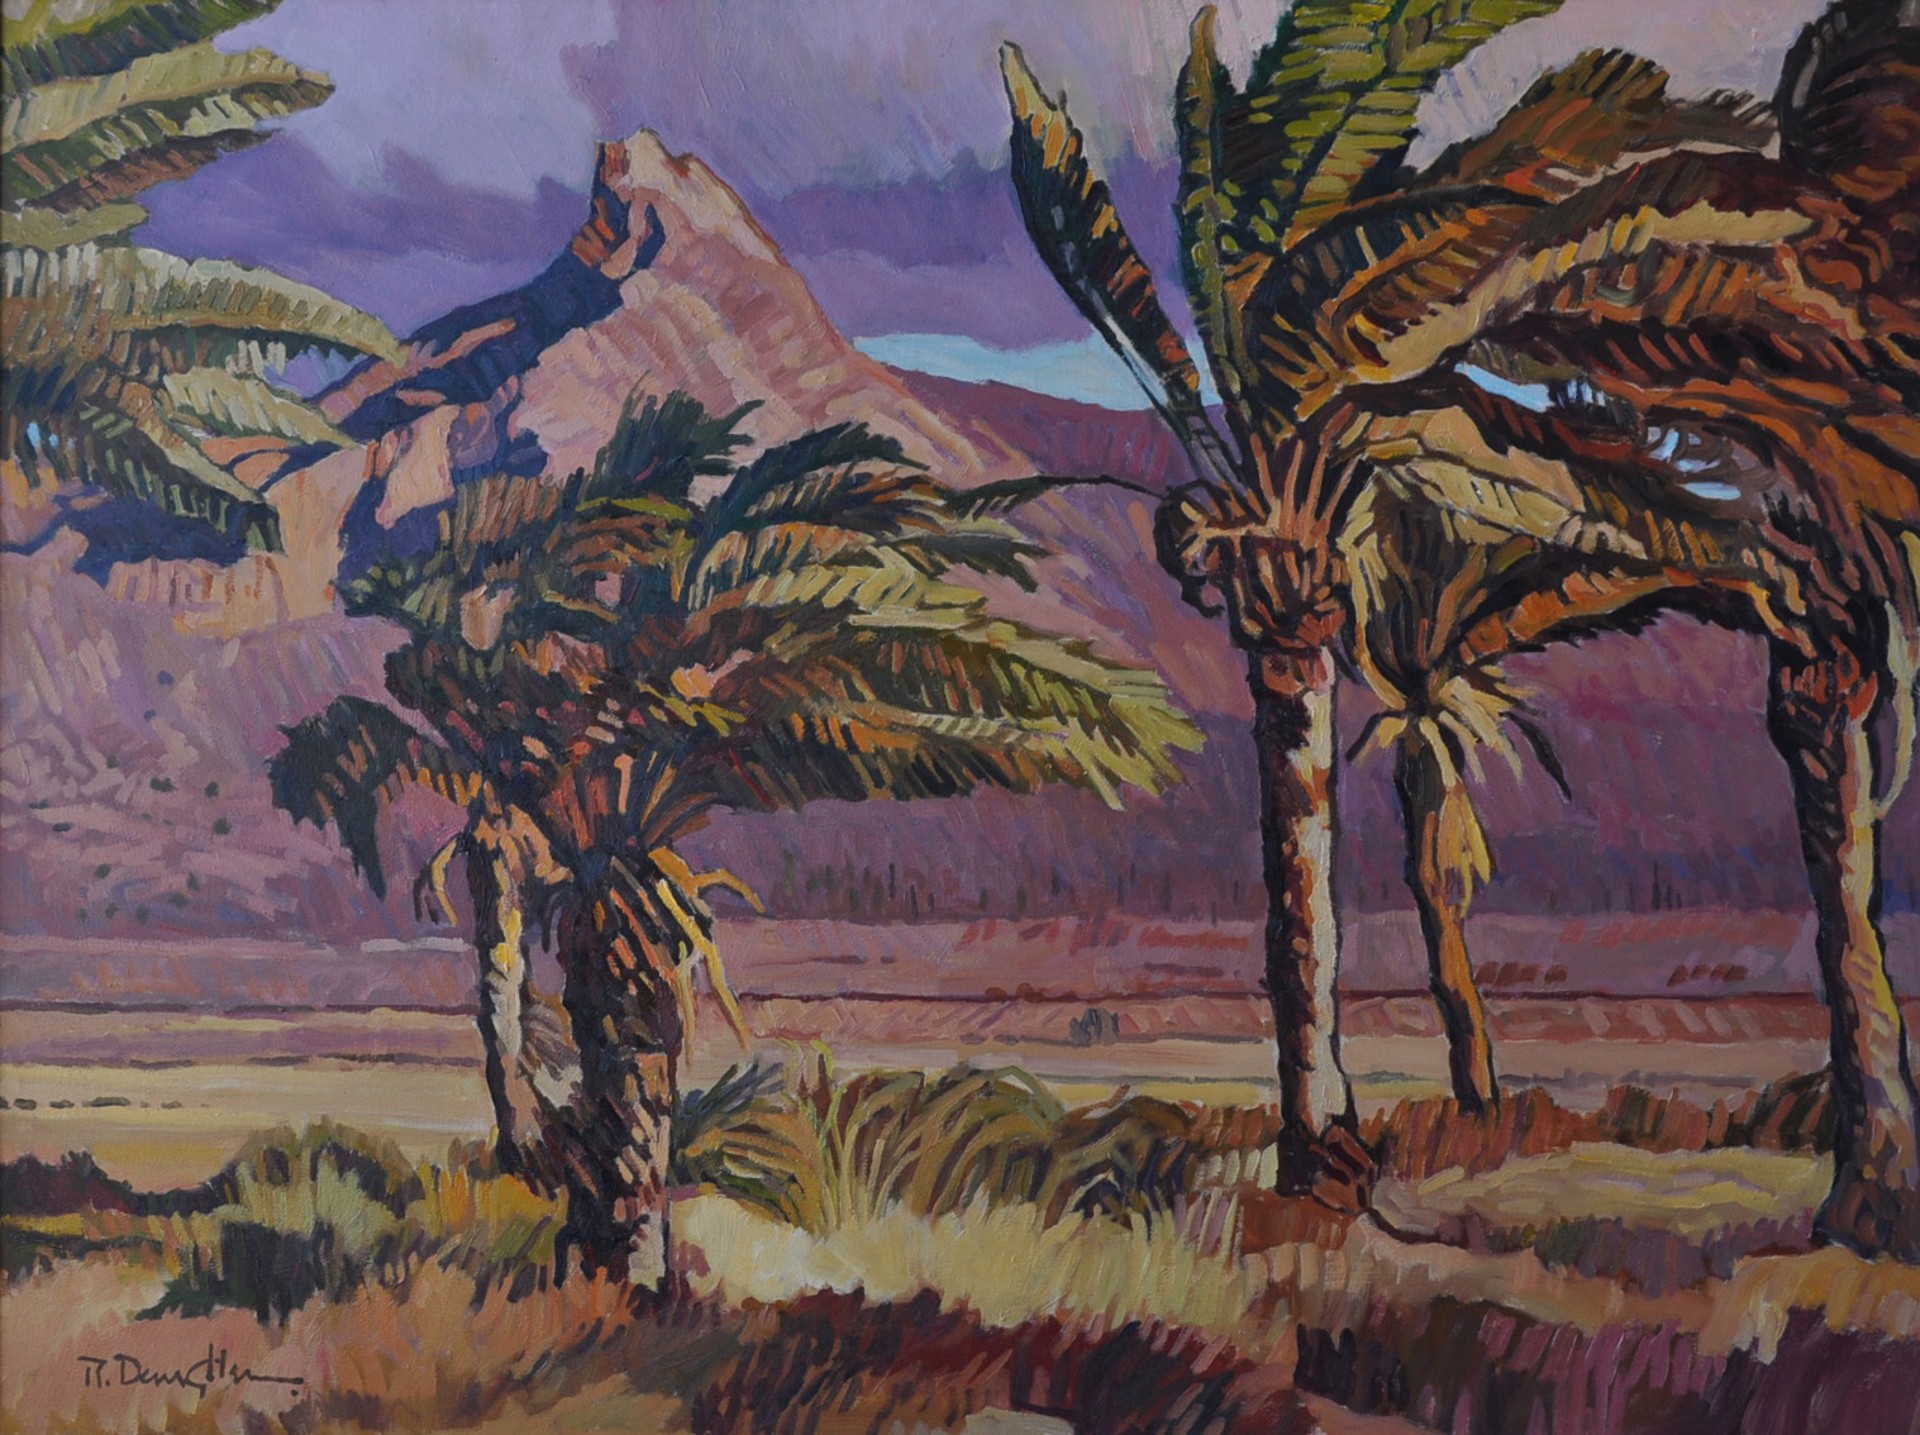 Tropical Winds by Robert Daughters (1929-2013)